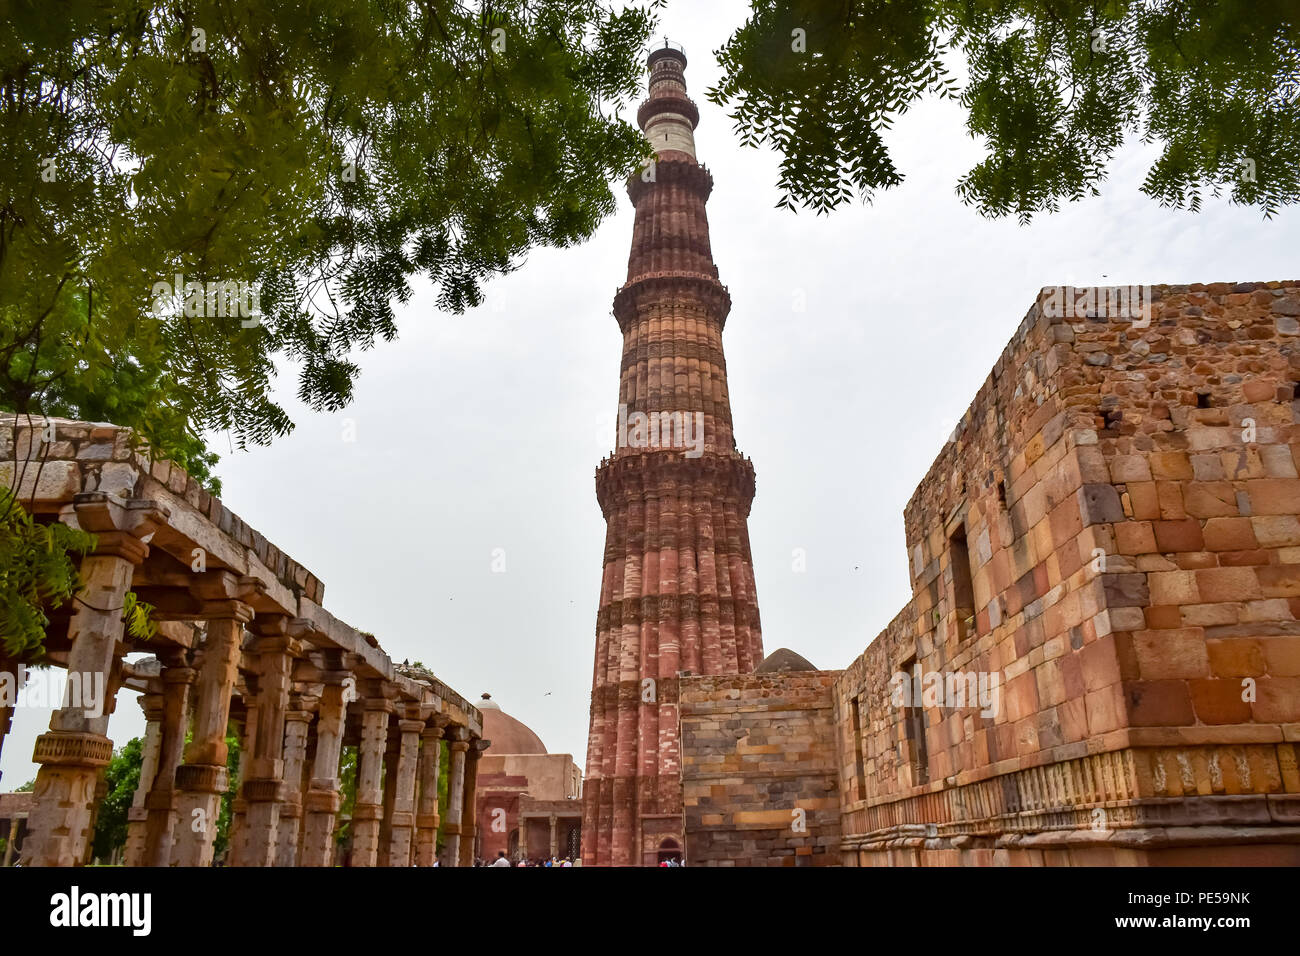 This photo seen Quwwat-ul-islam mosque made of red and yellow sand stone  ,has features of hindu as well as Islamic architecture stands tall within the Qutub complex in Delhi India. Qutub Minar standing 73 meters high at Delhi, is the tallest brick minaret and UNESCO heritage site. It represents Indo -Islamic architectural style, built by Qutb-ud-Din Aibak as a victory Tower in 1192 A.D. Stock Photo